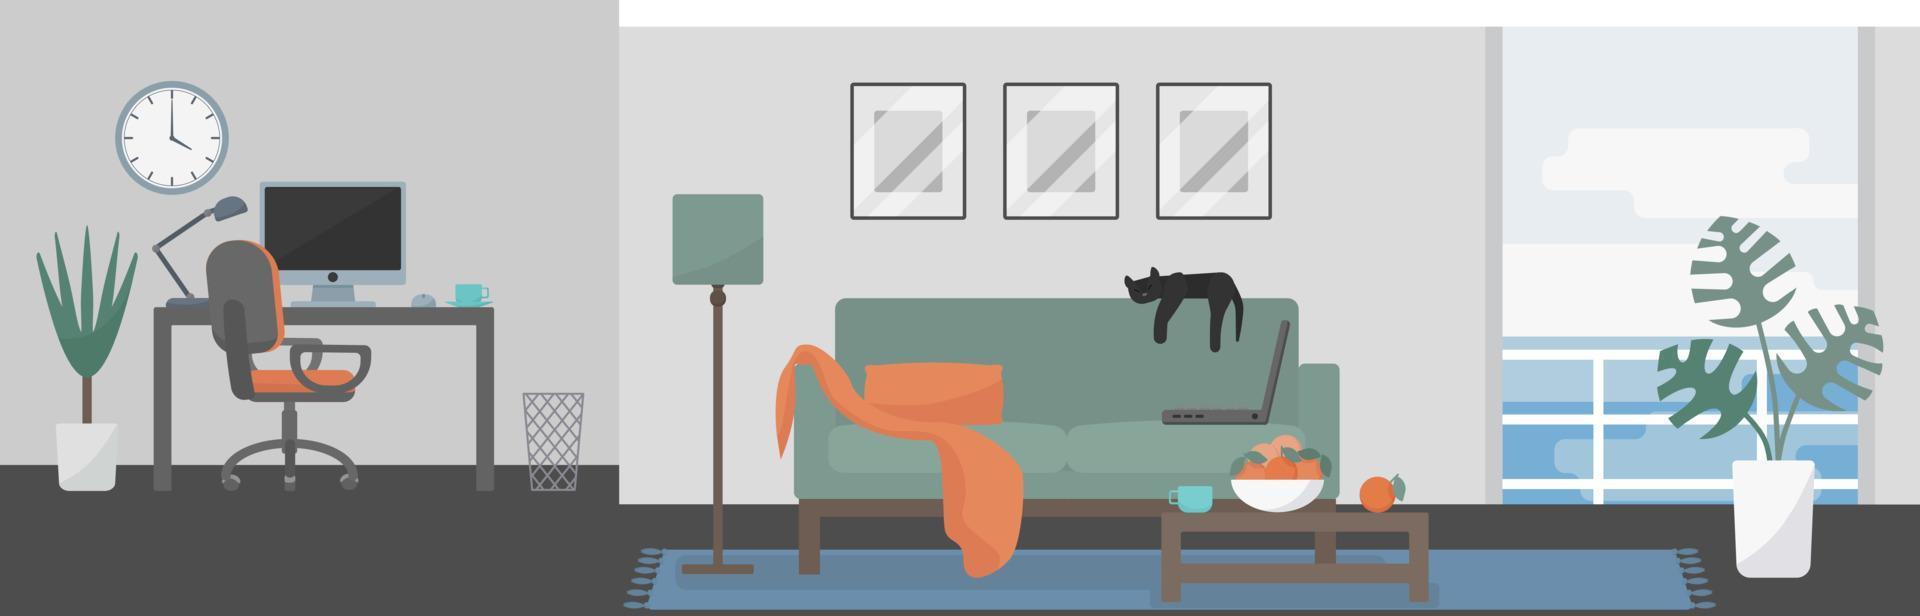 Minimalistic interior with couch, workspace and a window with a sea view. Work from anywhere, freelance concept. Flat style vector illustration.